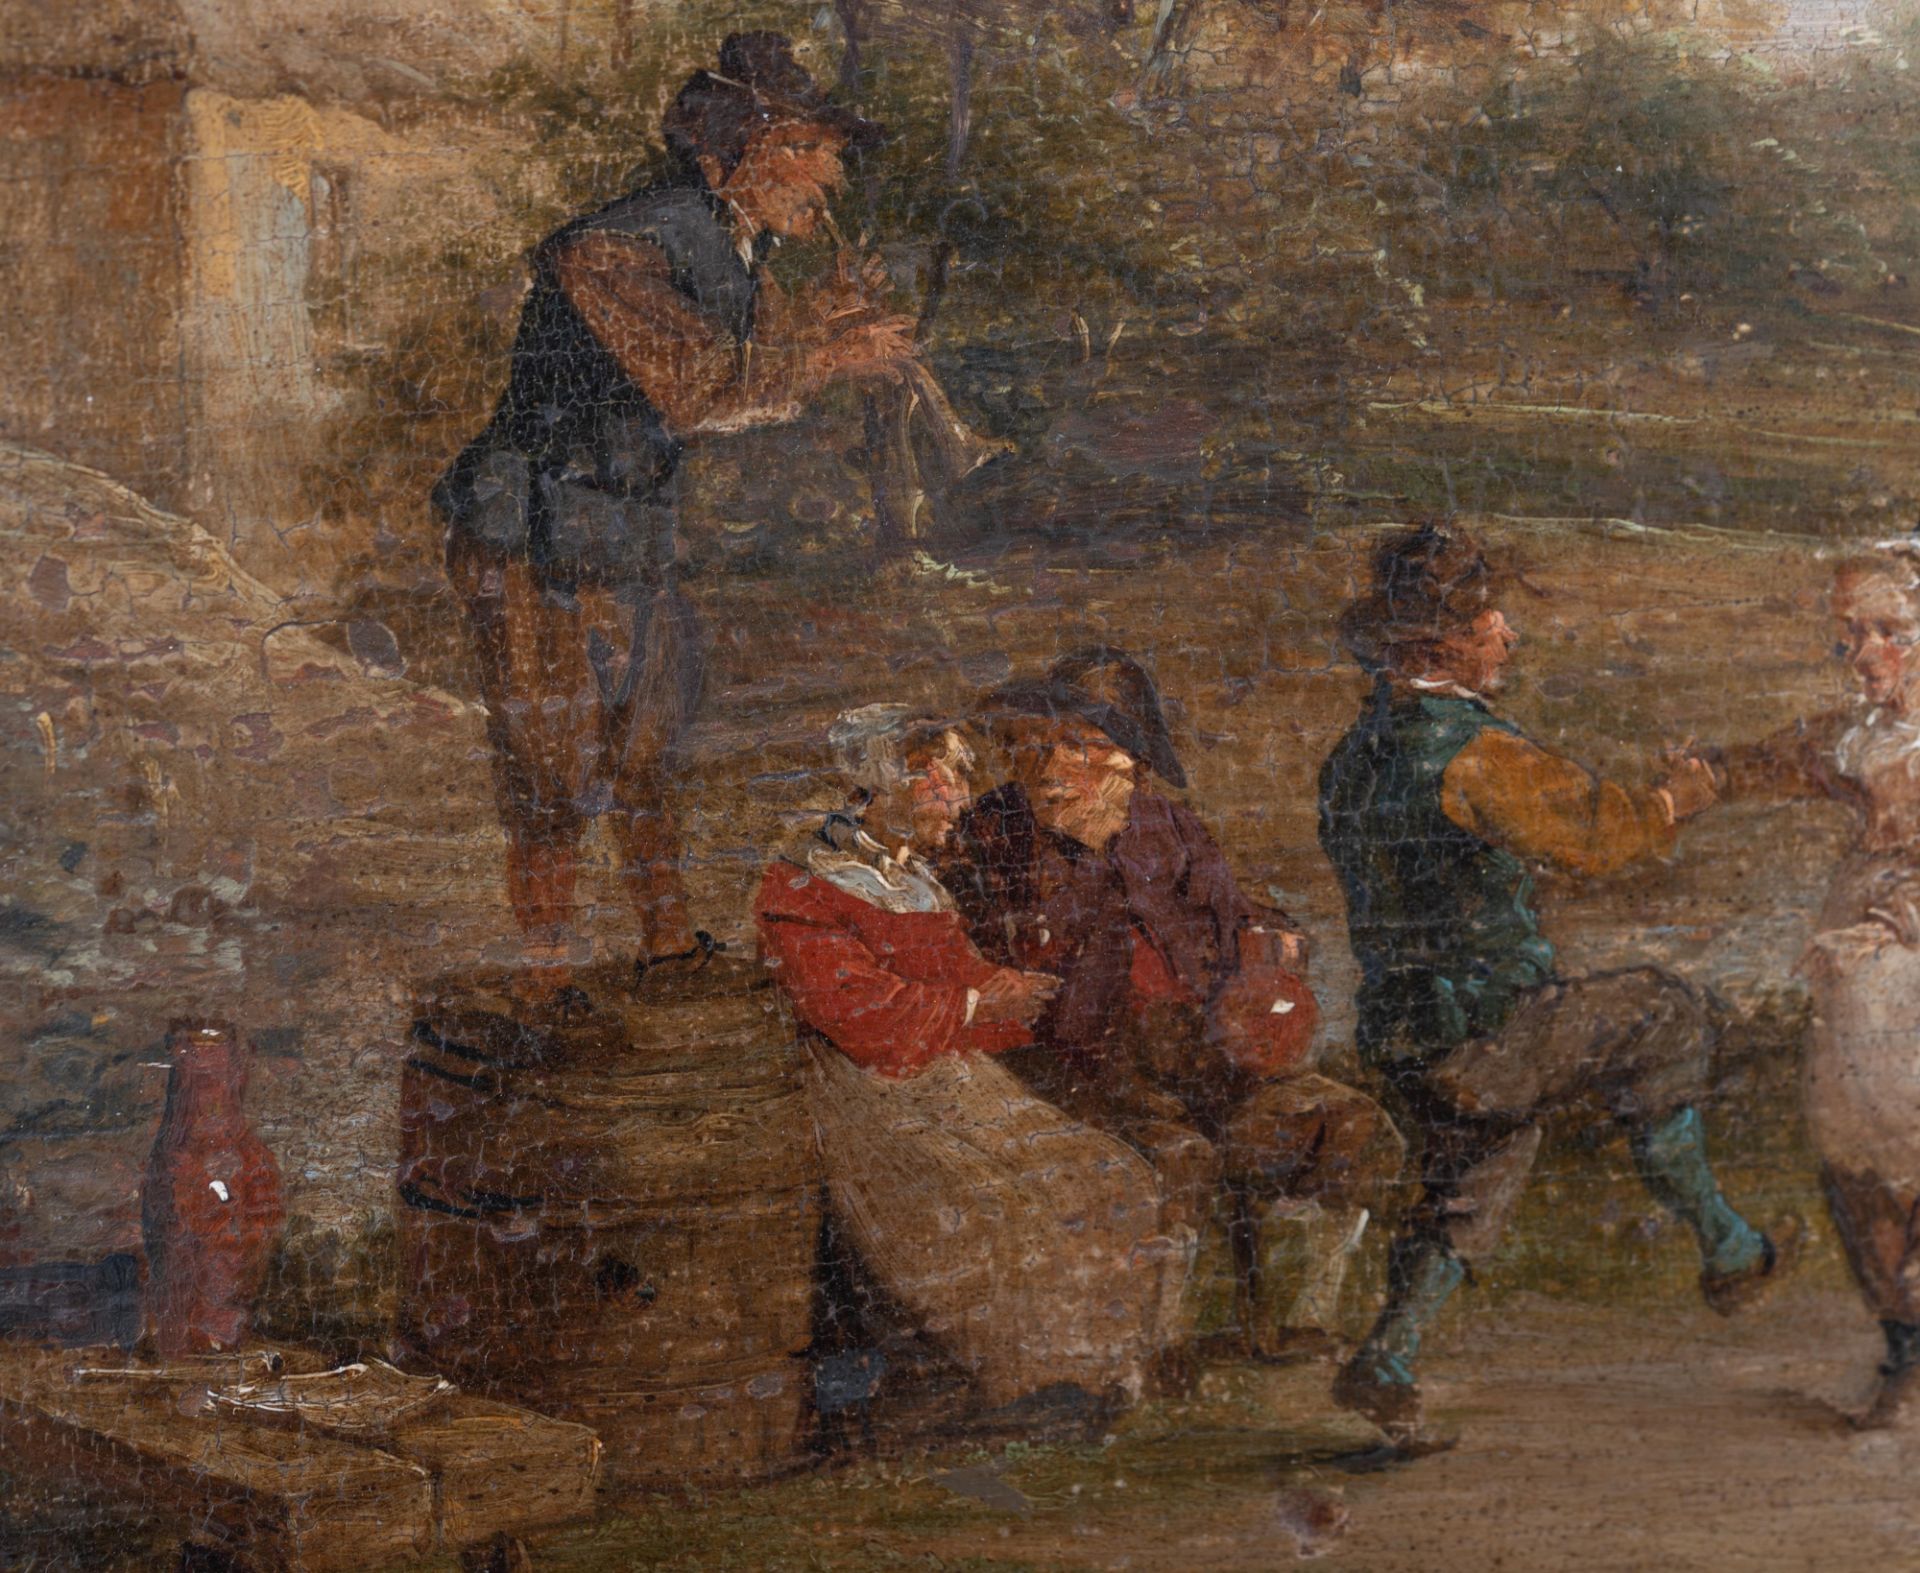 No visible signature, 'The Peasant Wedding', in the manner of David II Teniers, 18thC, oil on an oak - Image 6 of 14